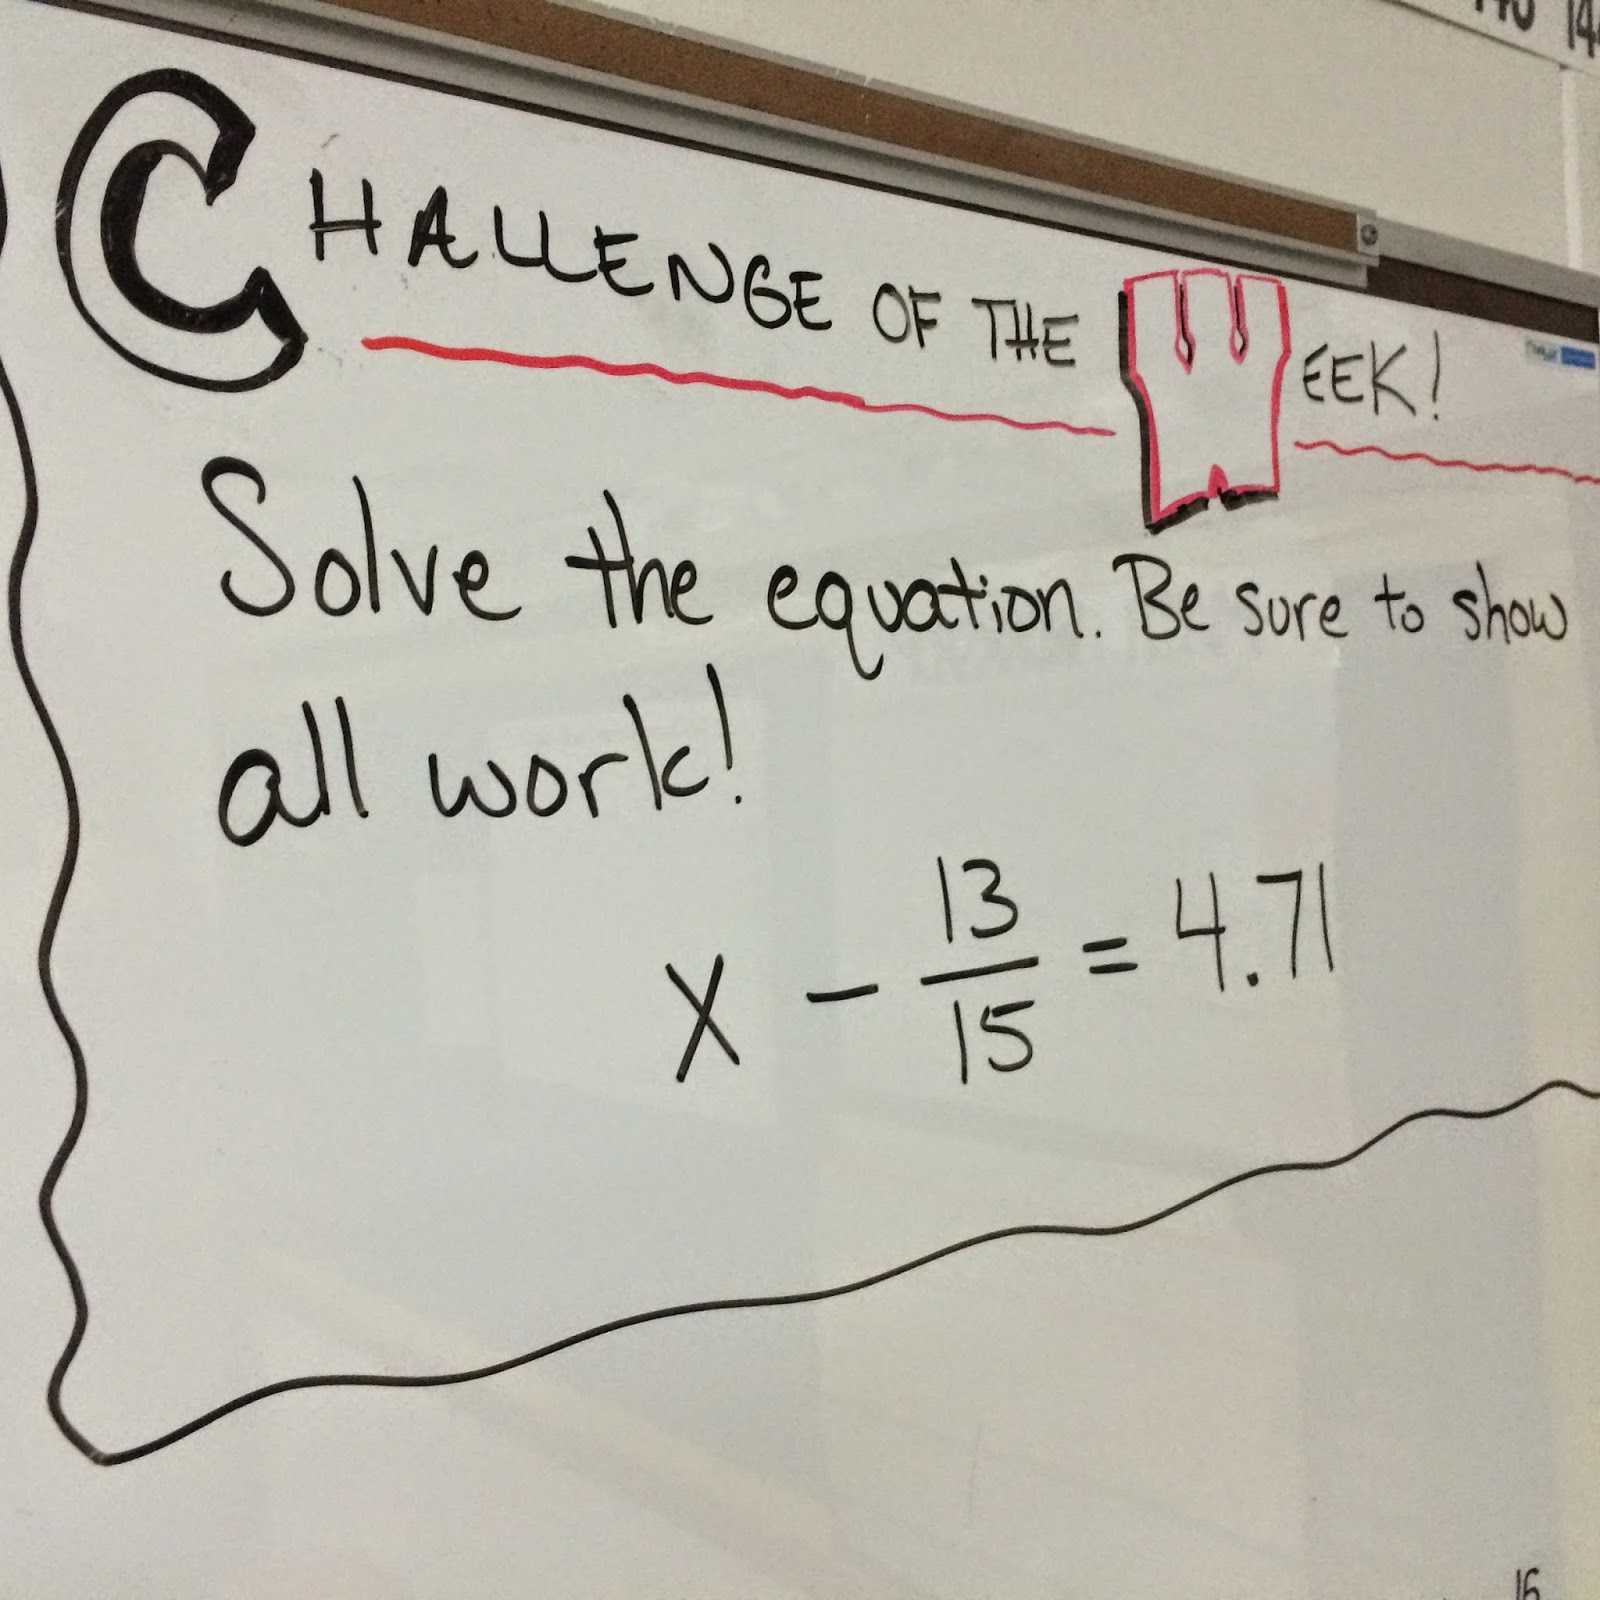 Square Root Worksheets 8th Grade Pdf as Well as Middle School Math Man Challenge Of the Week